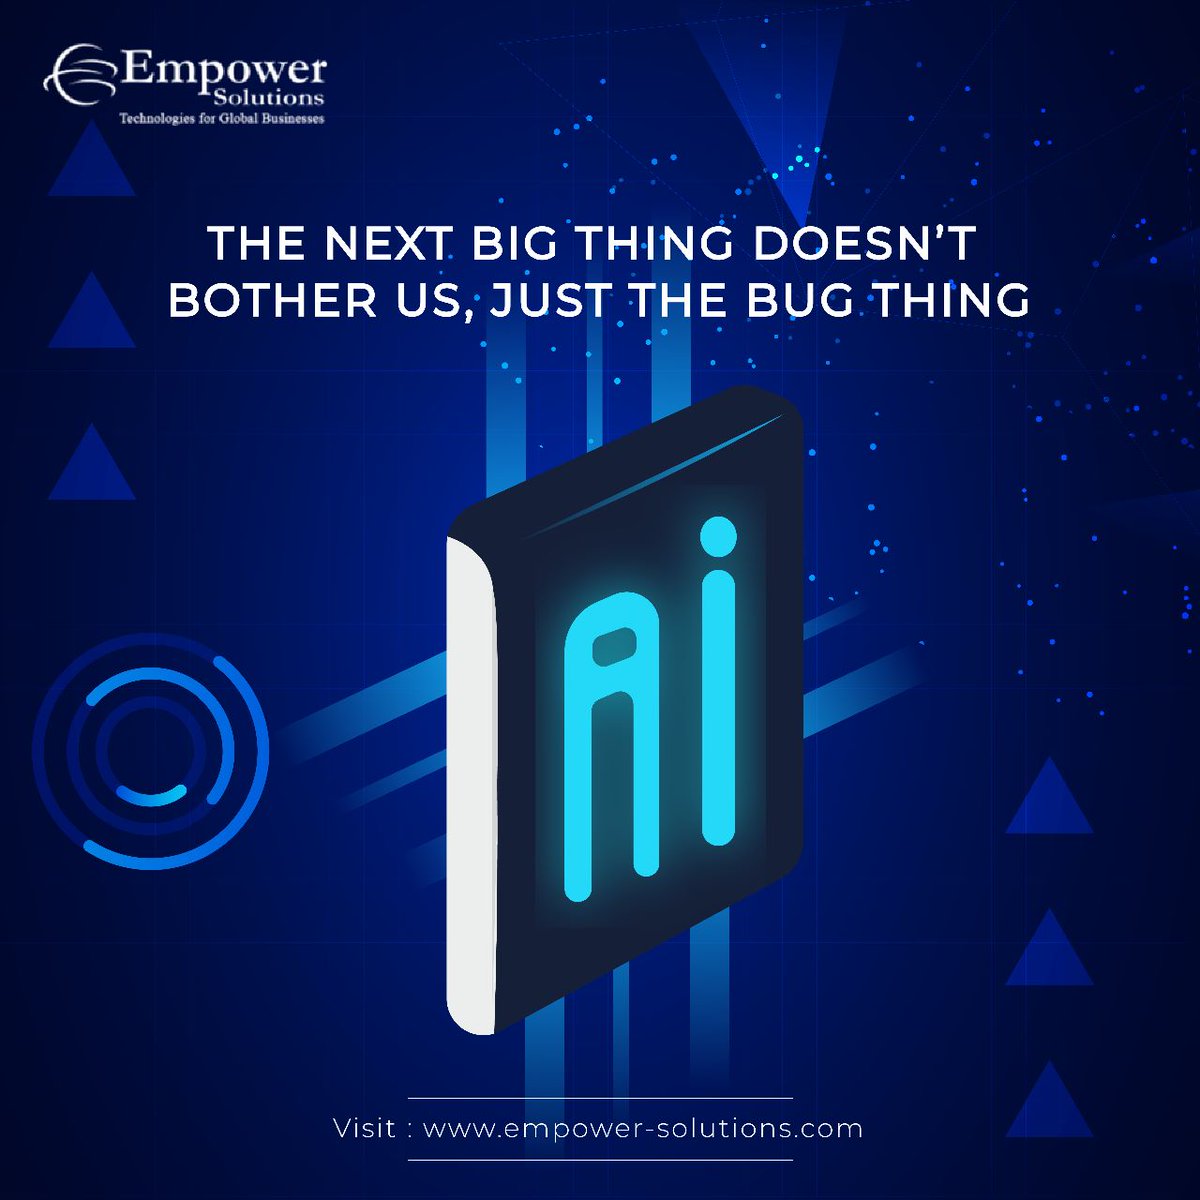 AI may be taking over the world, but don't worry - it's not bothering us humans...it's just the bugs it's after! 🐜🤖🙅‍♀️ 
Get future ready next gen tech solutions with Empower Solutions and #GetEmpowerd.

#EmpowerSolutions #AIHumor #BugHunt #RobotInvasion #NotTodayBugs